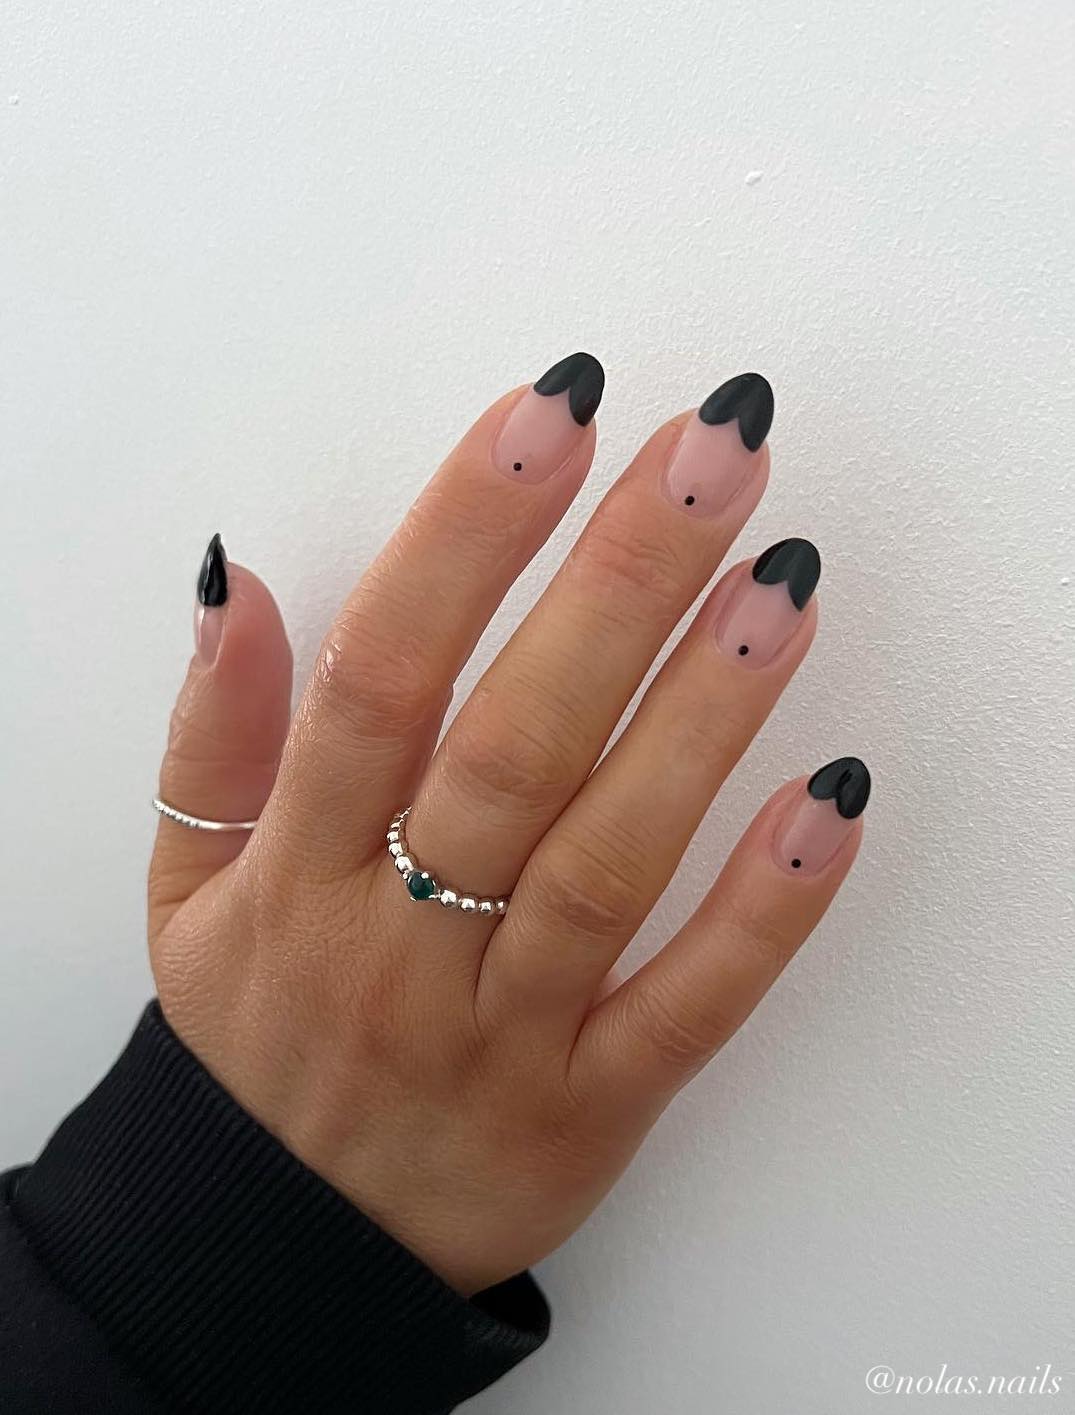 A hand with short nude almond nails featuring black scalloped French tips and a black dot detail